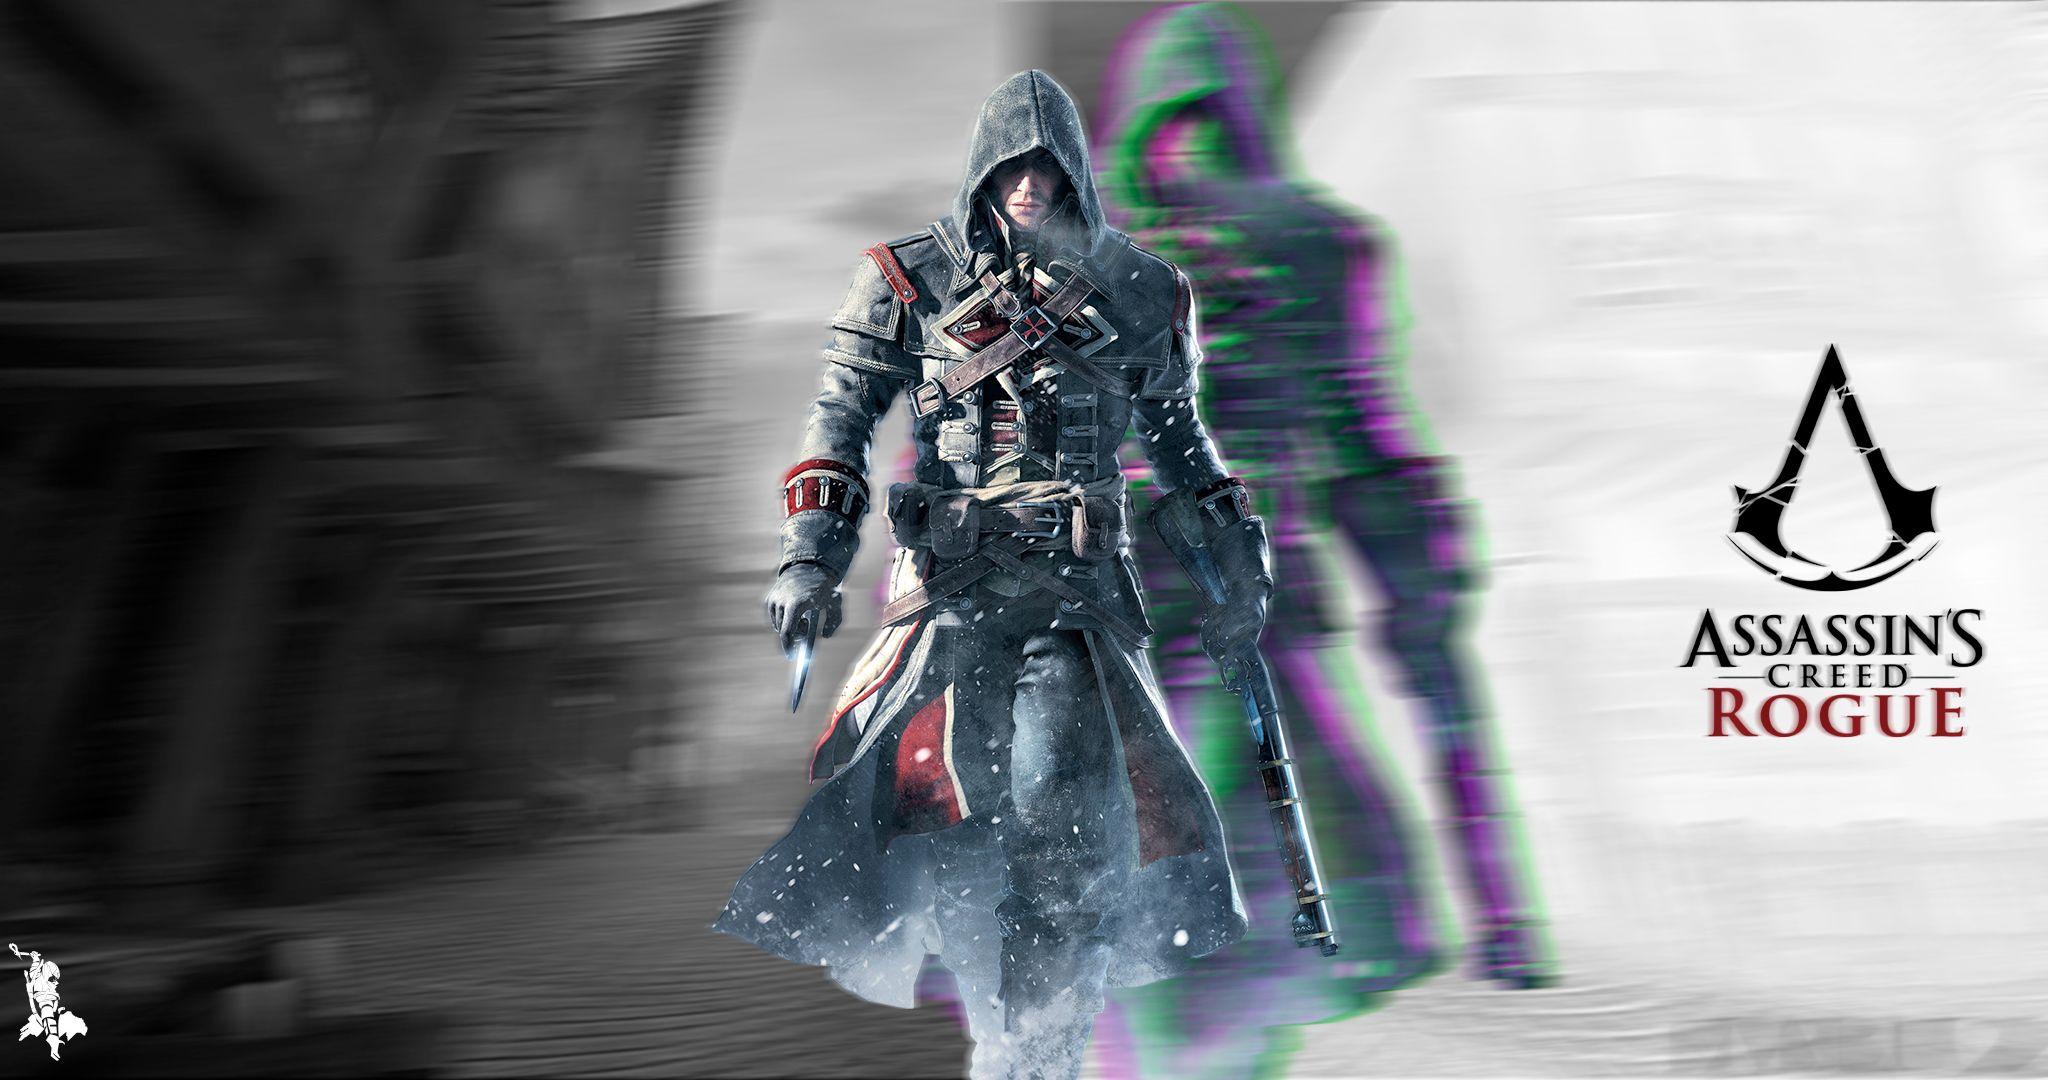 Steam Community - Guide - Assassin's Creed Rogue Memories Guide